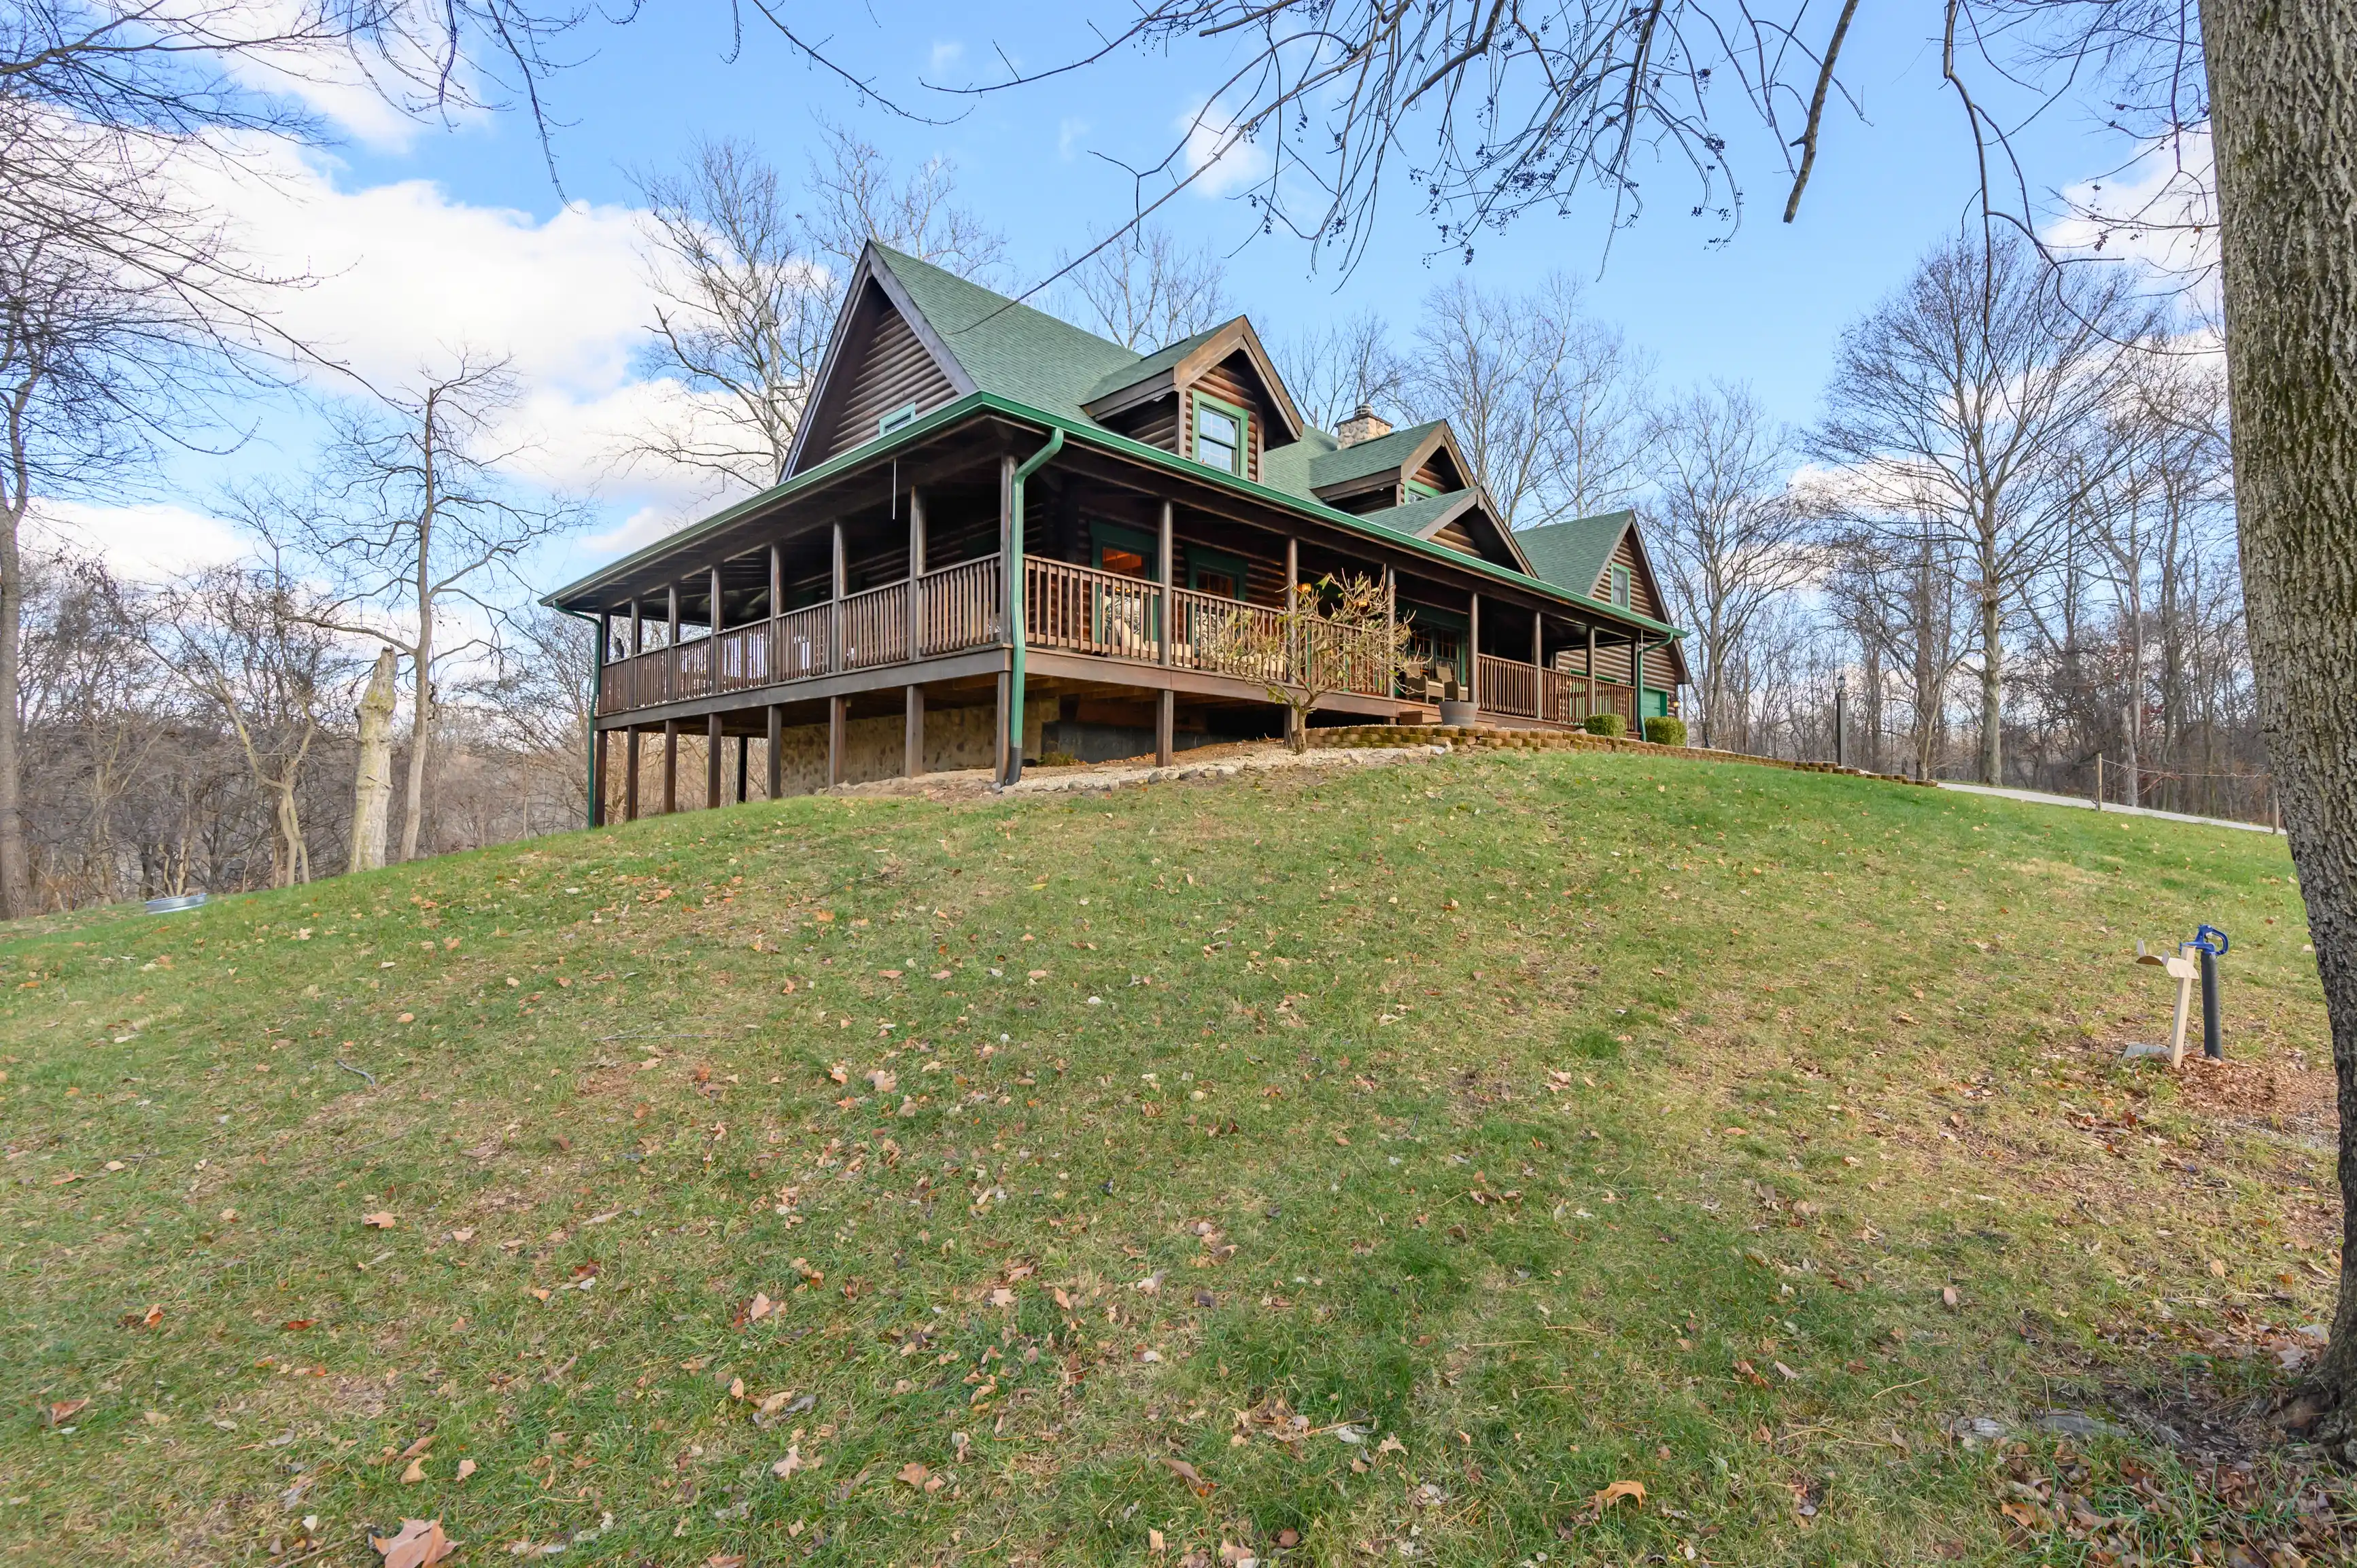 A large cabin with a green roof and an expansive wooden deck sitting on a grassy hill with bare trees in the background and a clear sky.